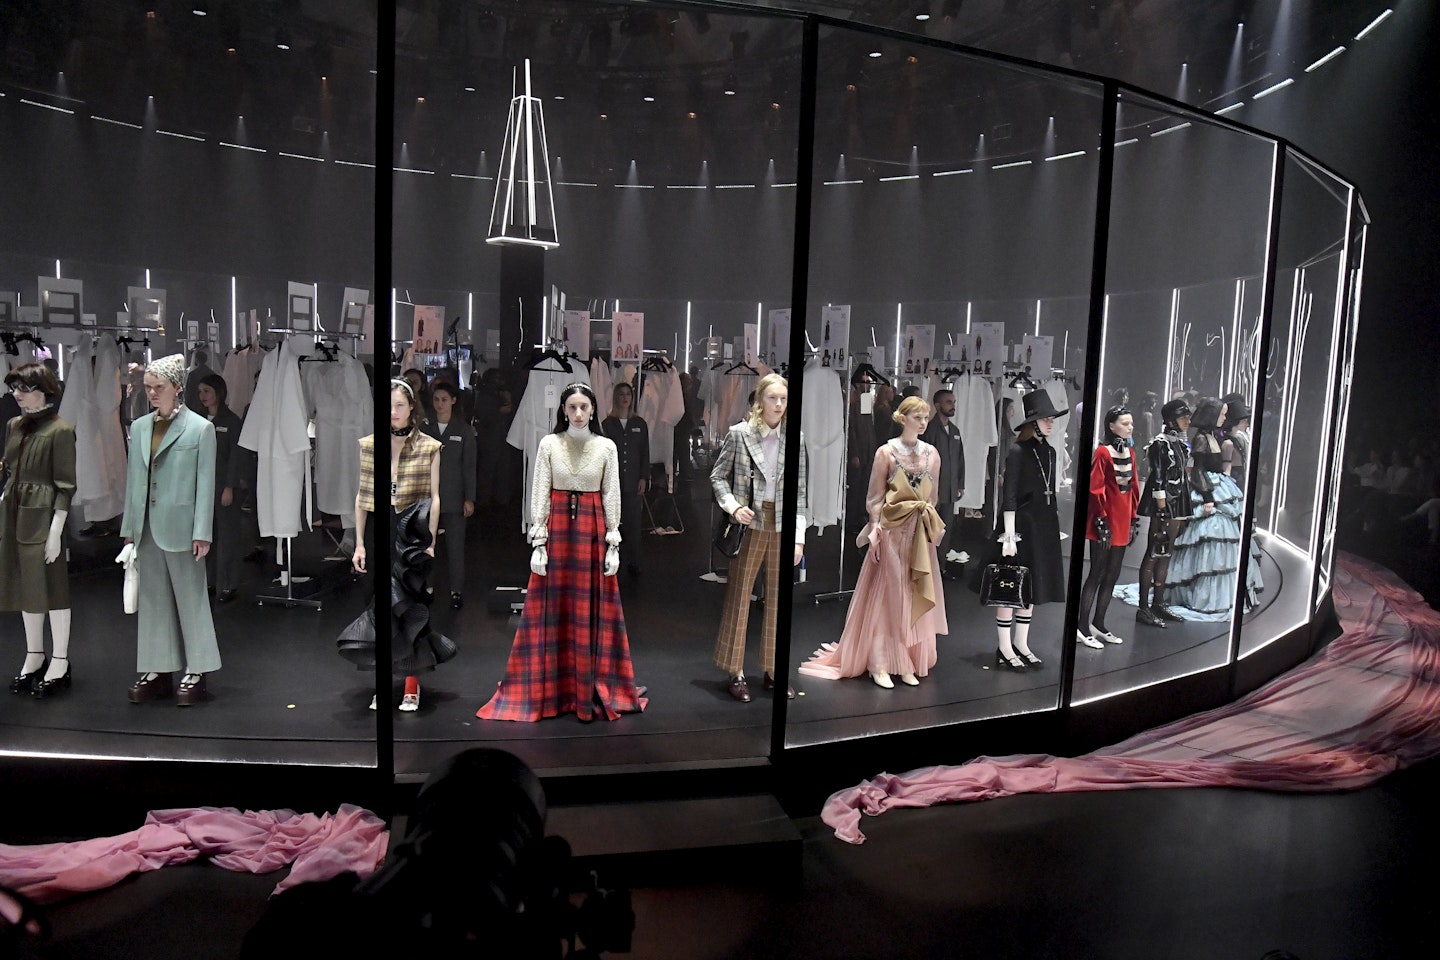 Is there anything from the Gucci runway show that's actually wearable?